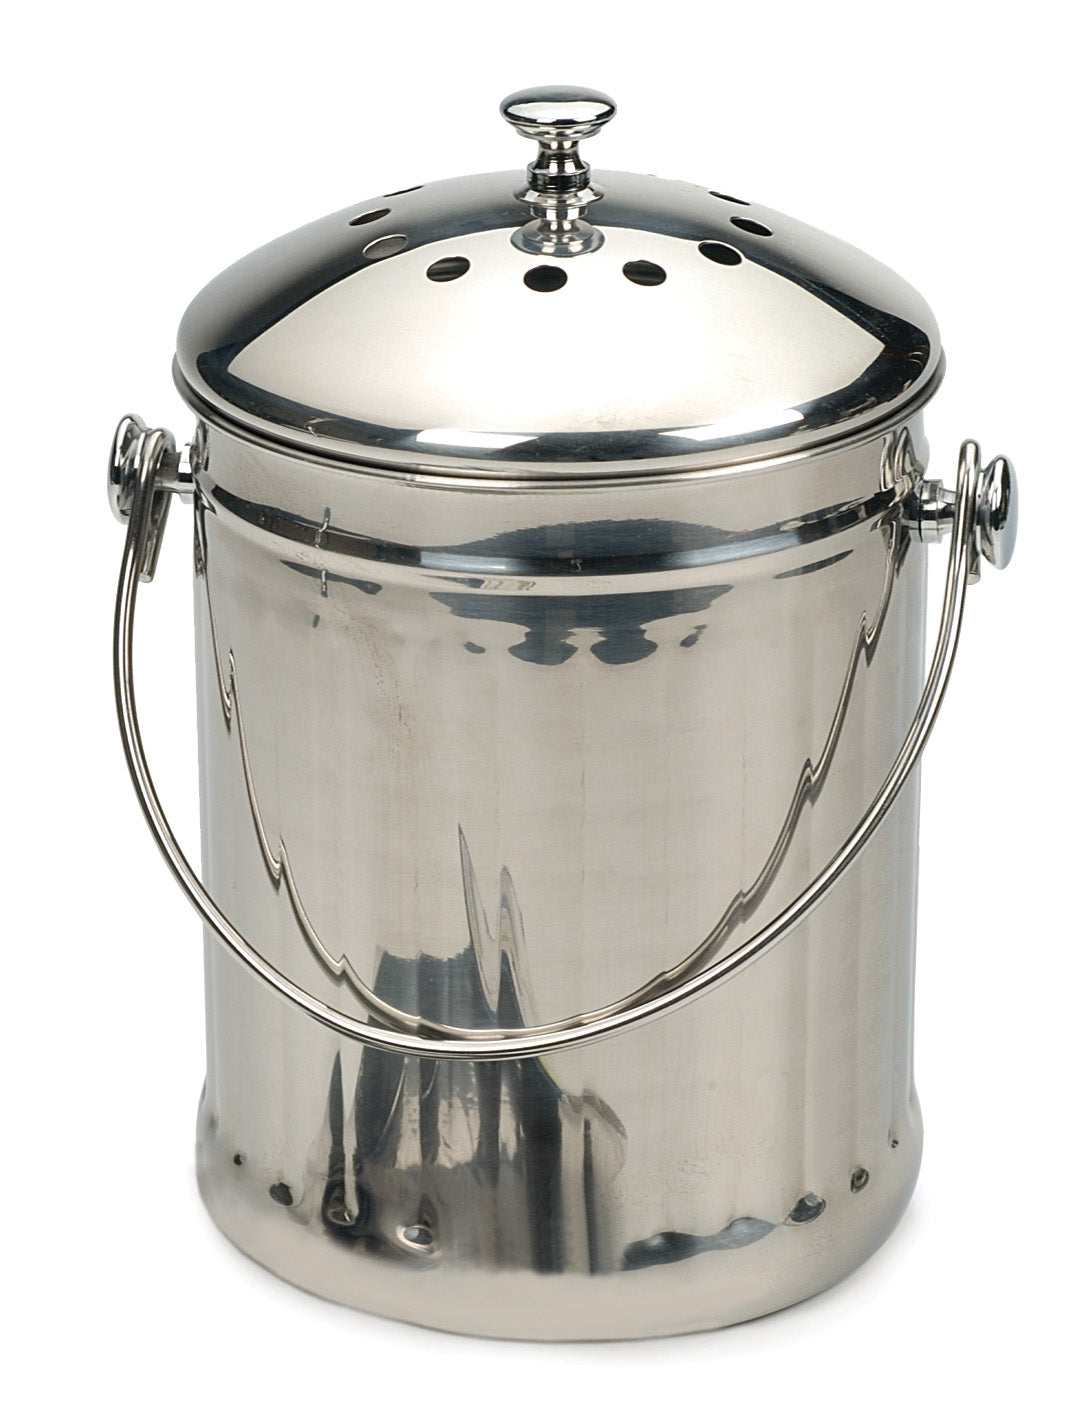 stainless steel compost pail with handle and lid on white background.